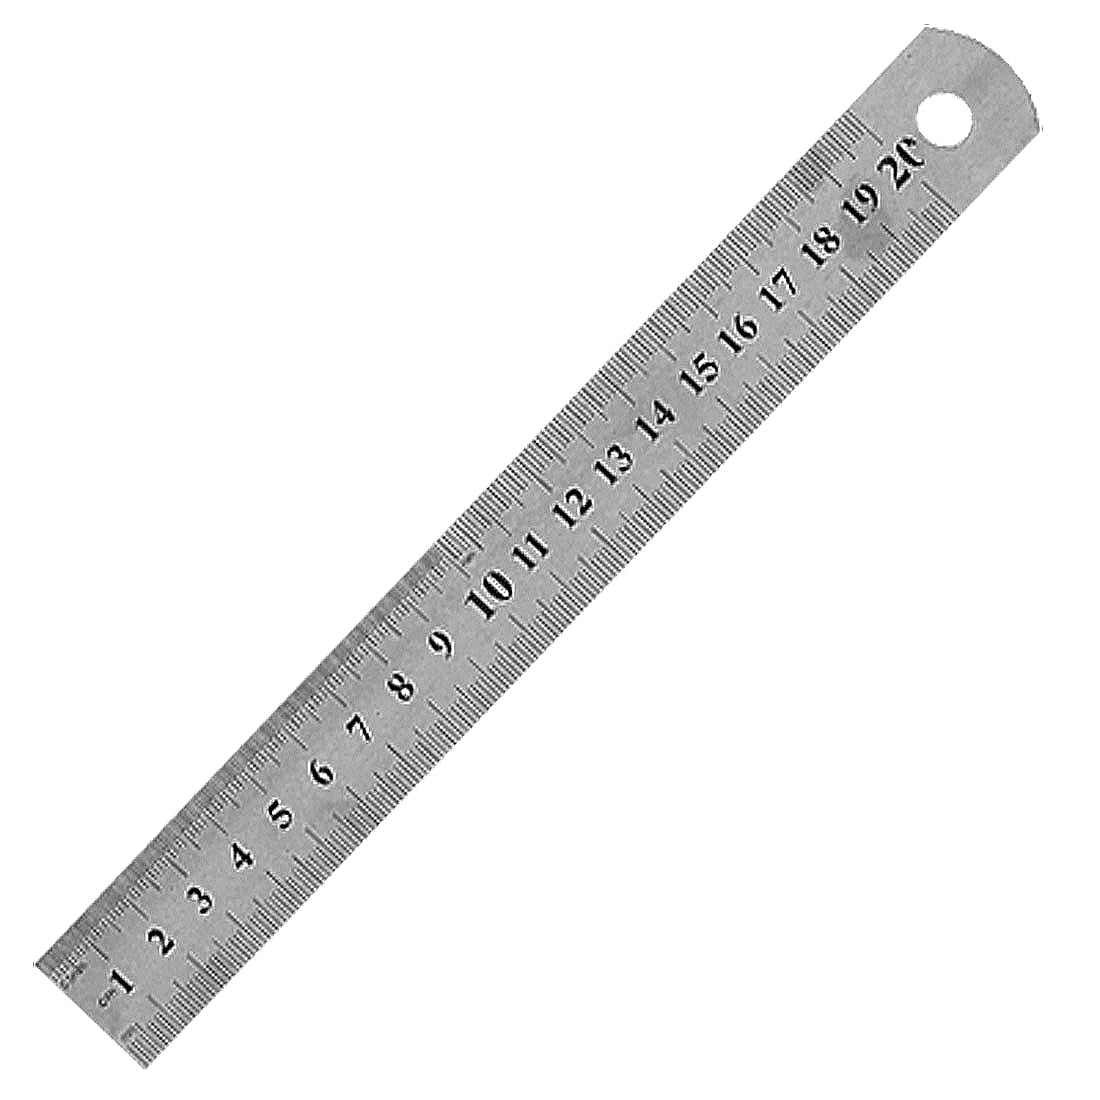 How Long Is Seven Inches On A Ruler : There are two types of rulers you can use: - Srkybdodrjecx